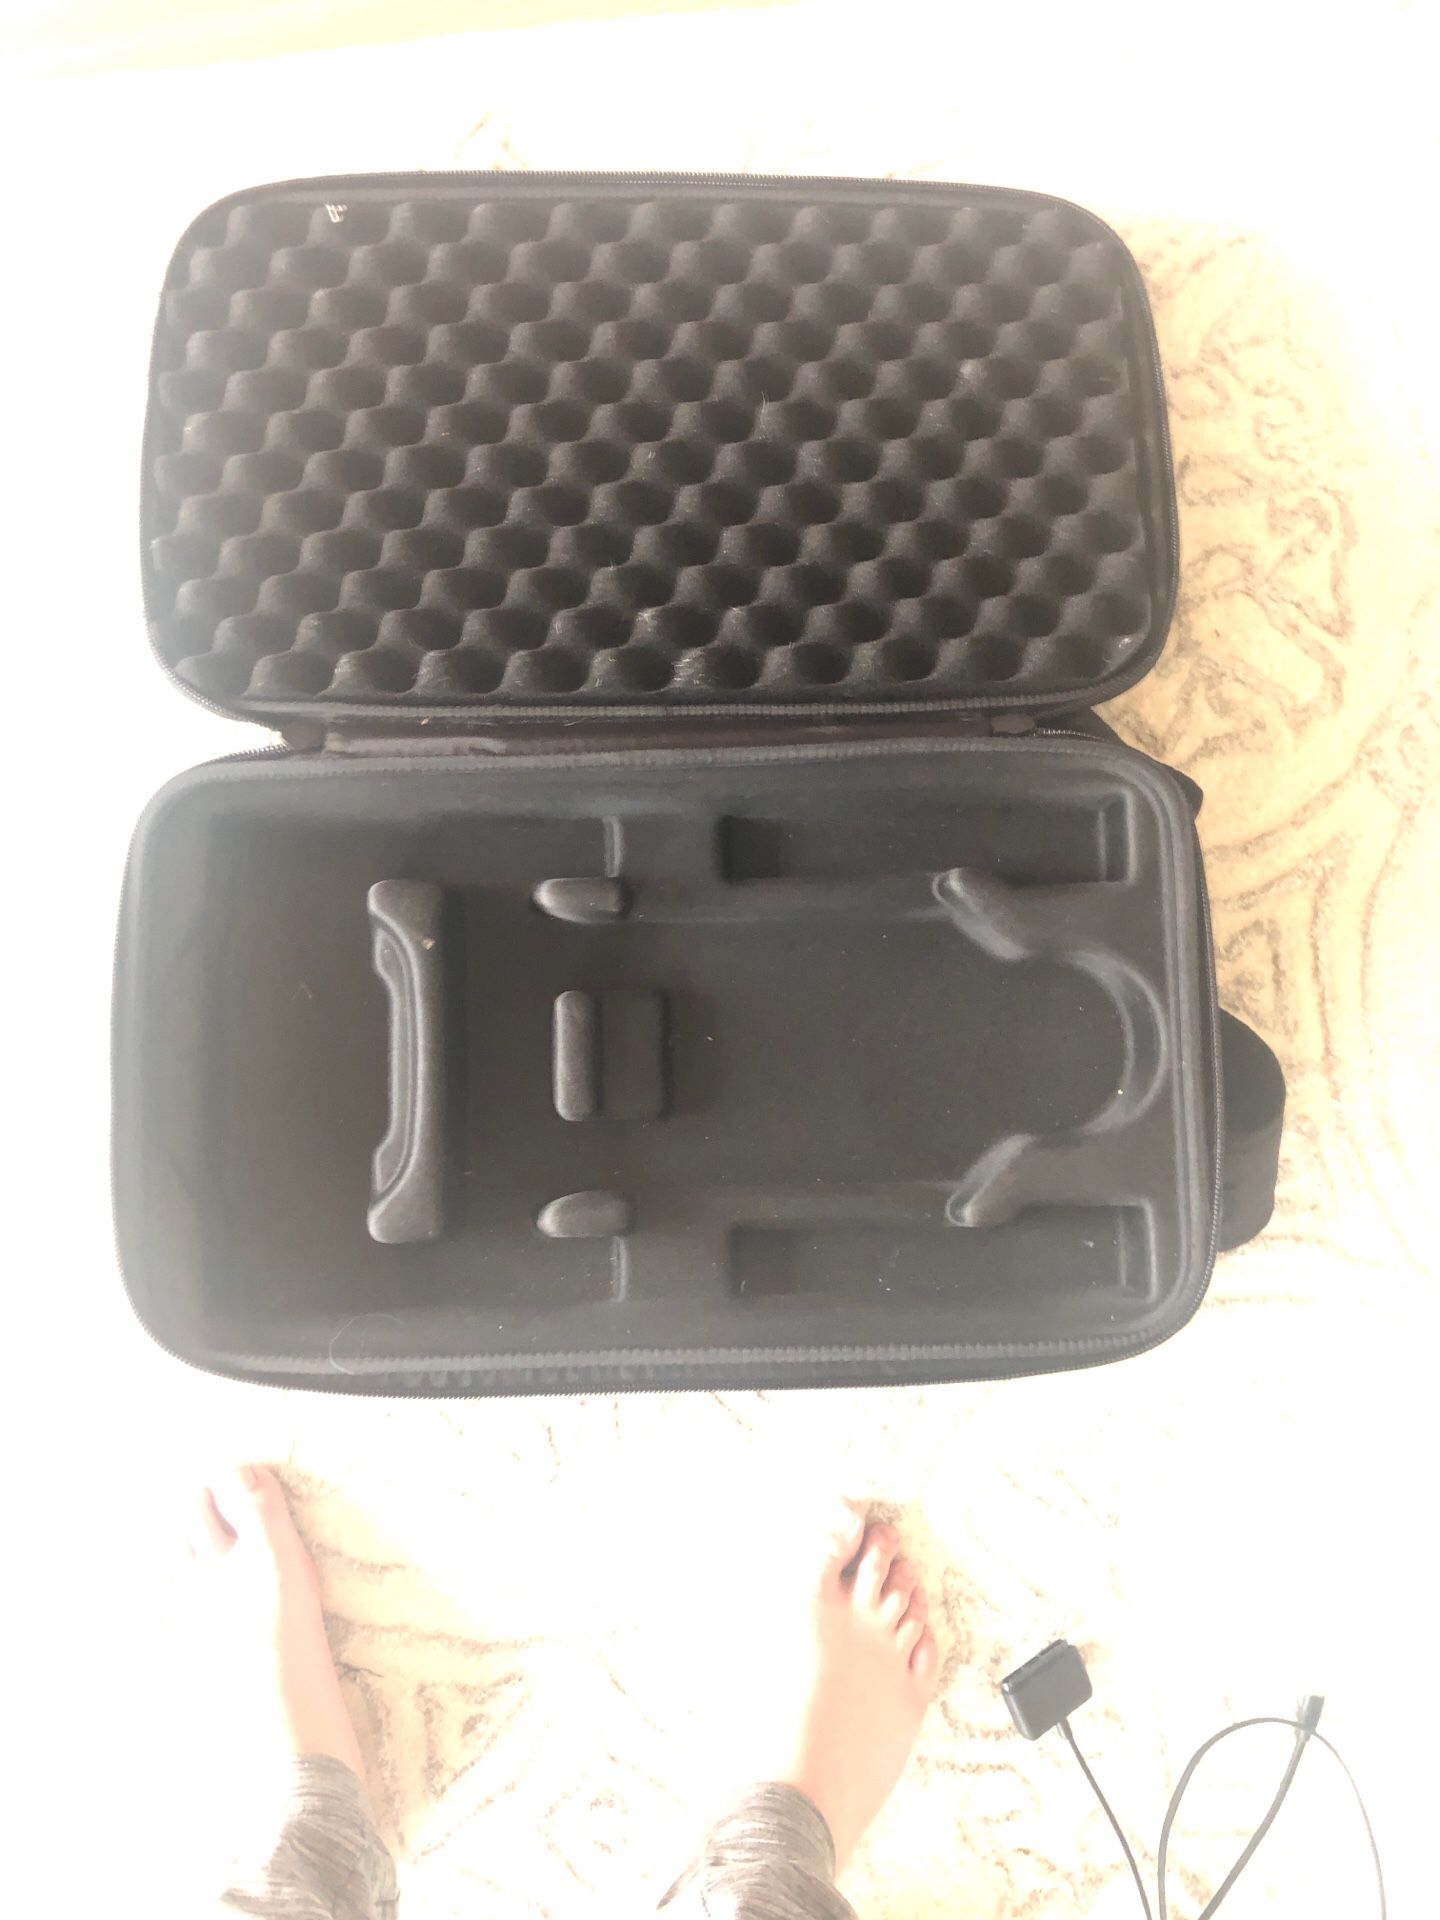 GoPro karma drone case great condition